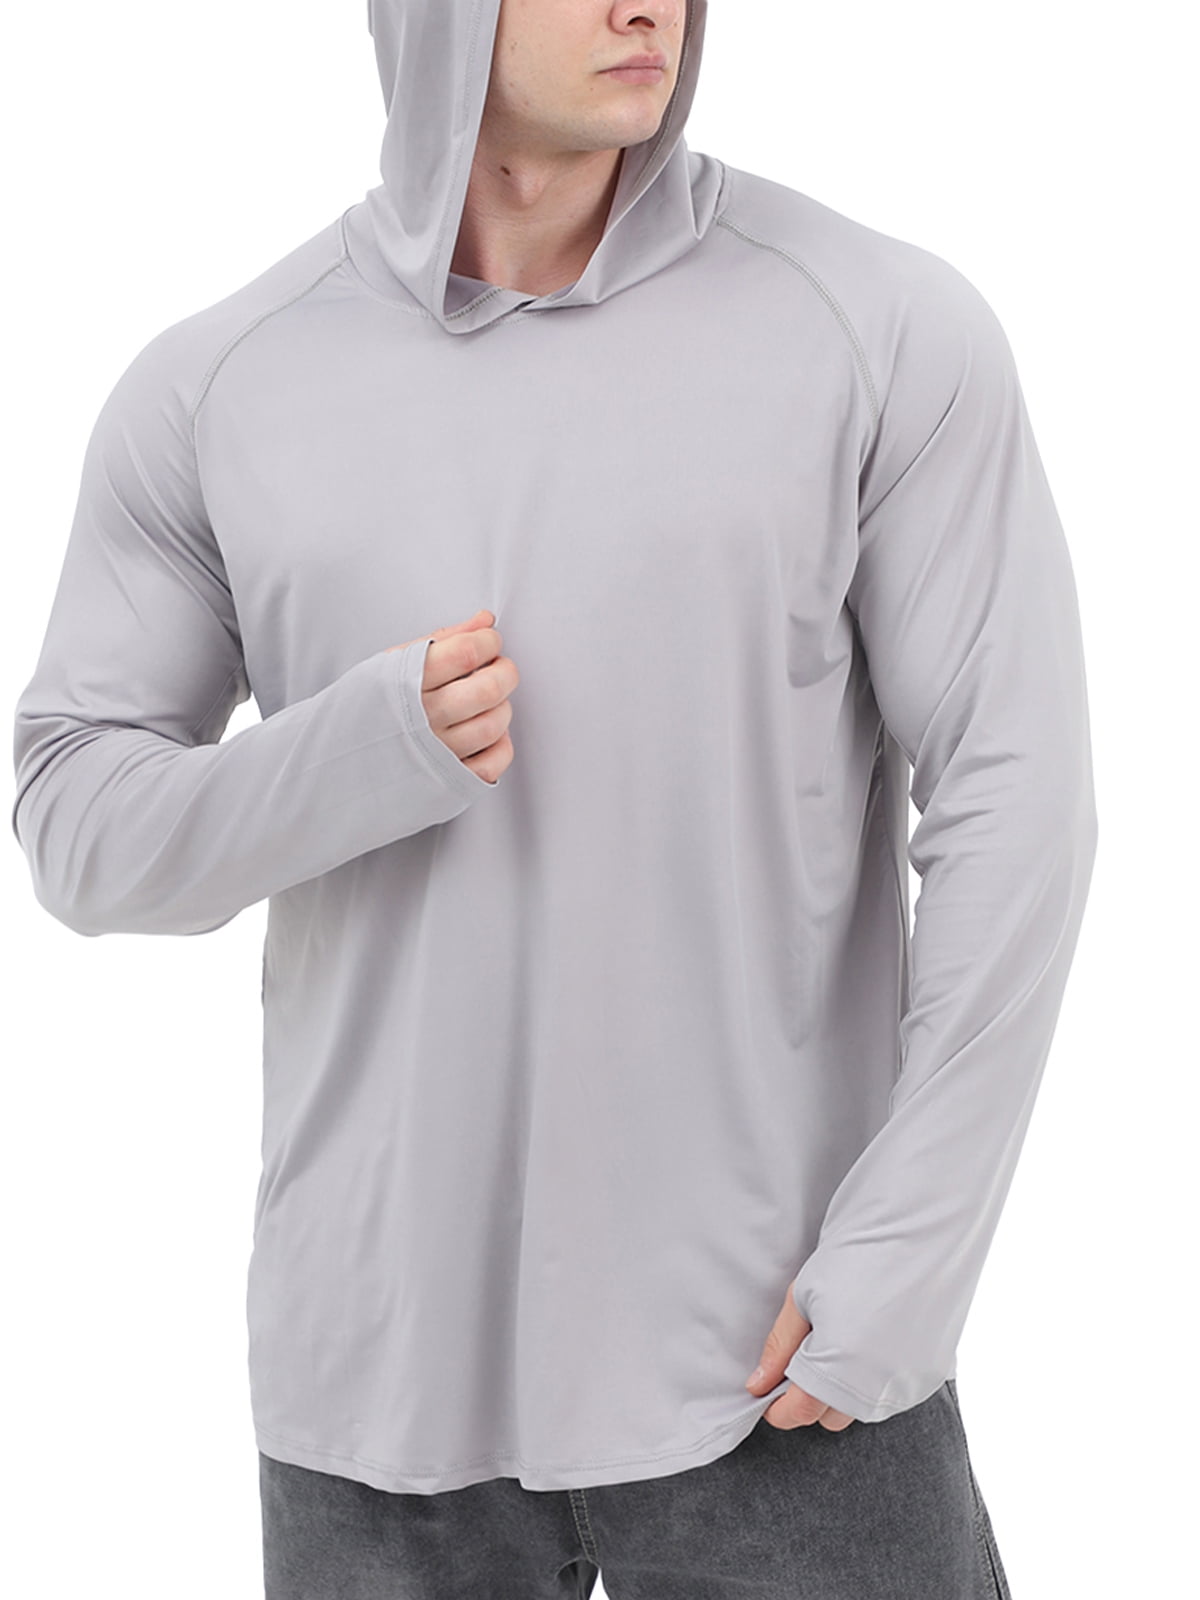 EASY BIG Long Sleeve Fishing Shirts Fishing Hoodie for Men and Women Fit Performance Clothing, UPF 50+,Quick-Dry